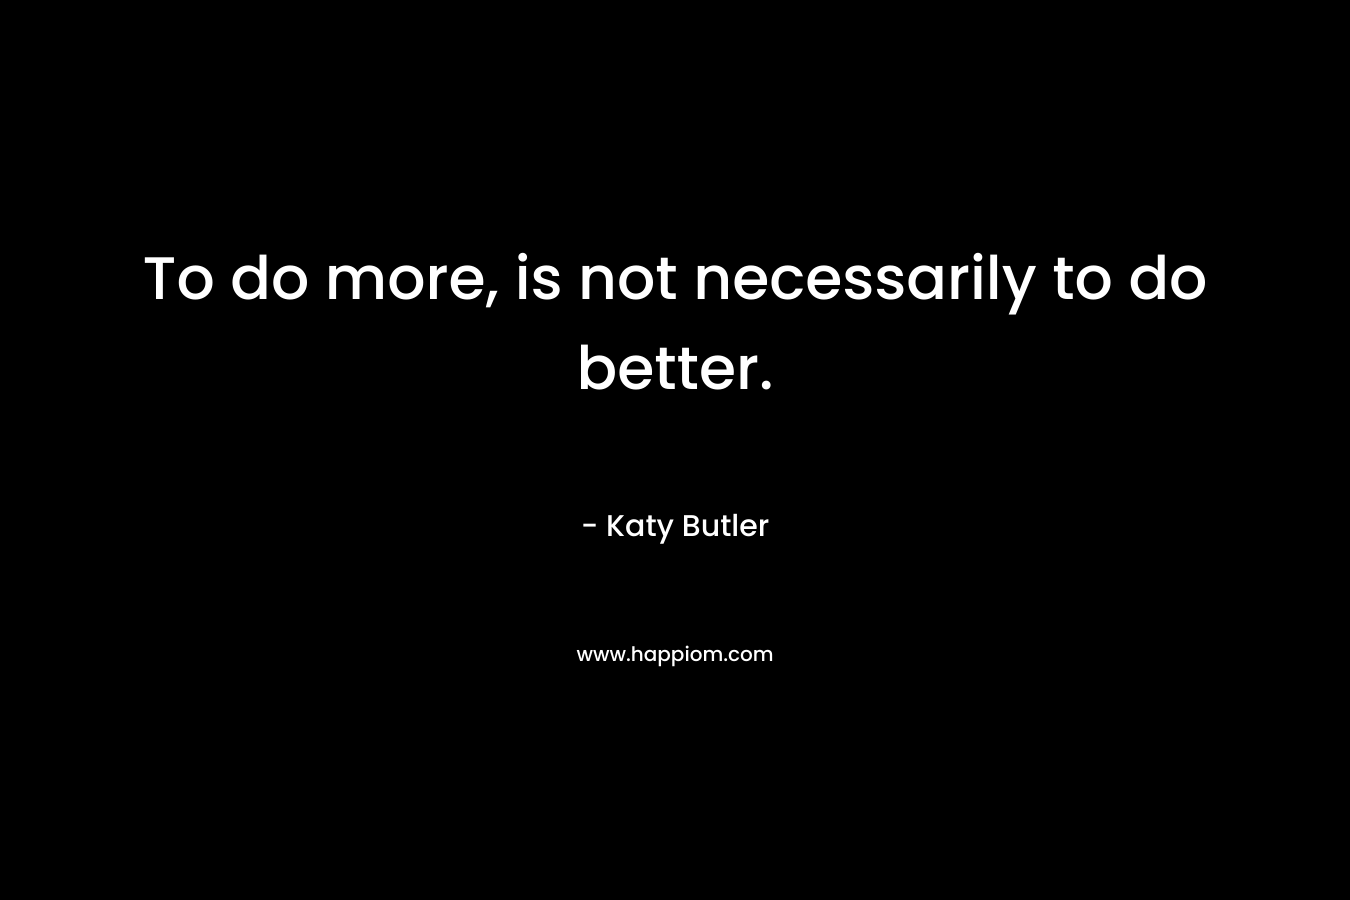 To do more, is not necessarily to do better. – Katy Butler